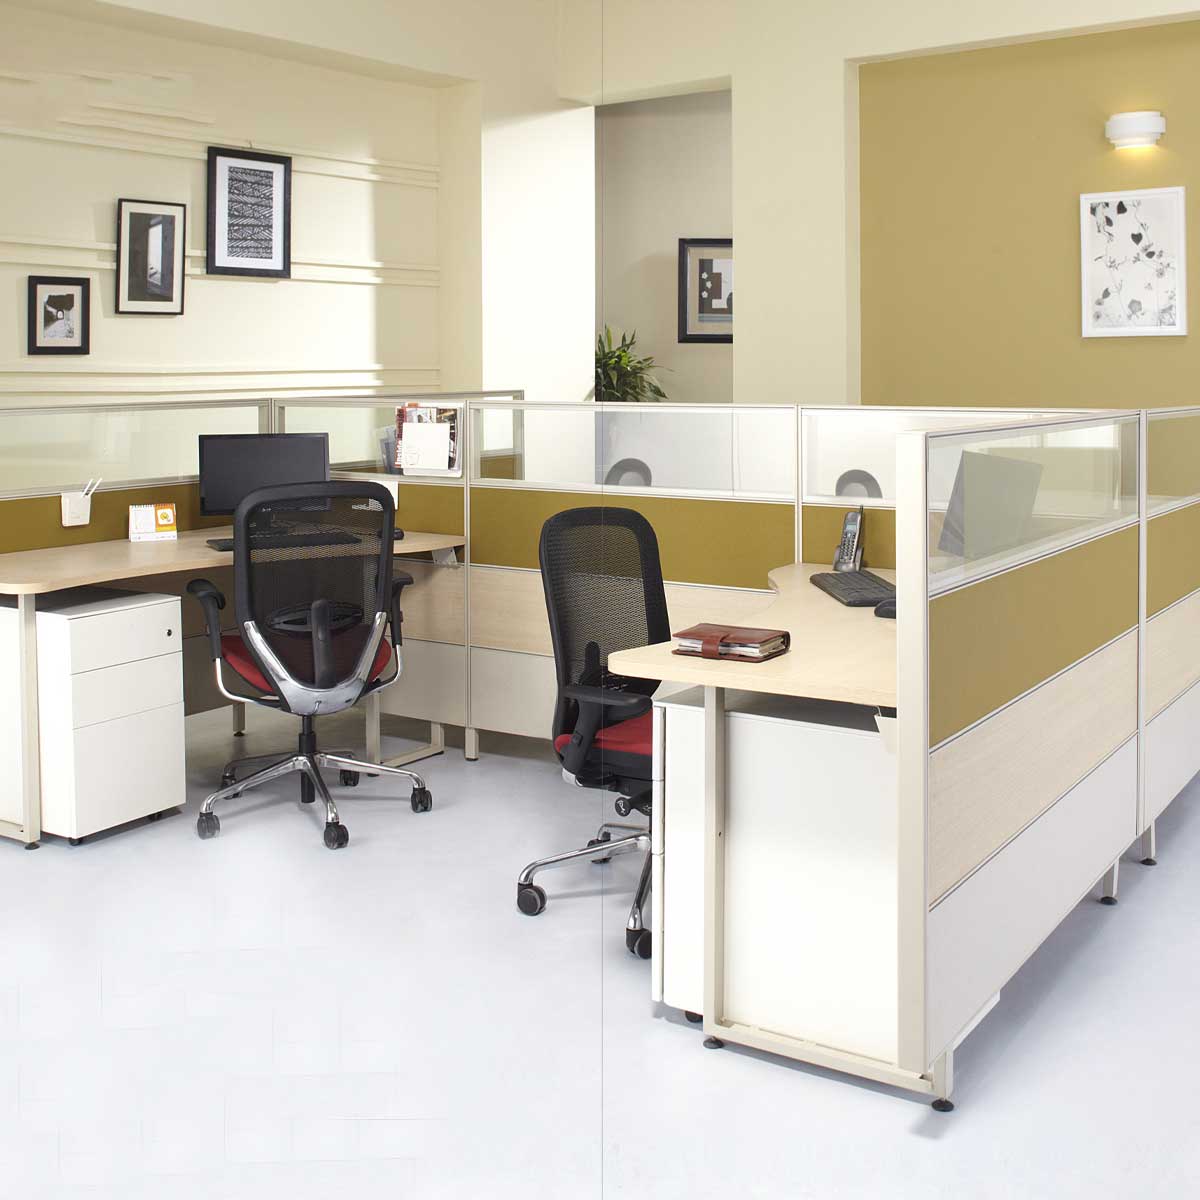 Office Cubicle Manufacturers, Suppliers in Greater Kailash Ii